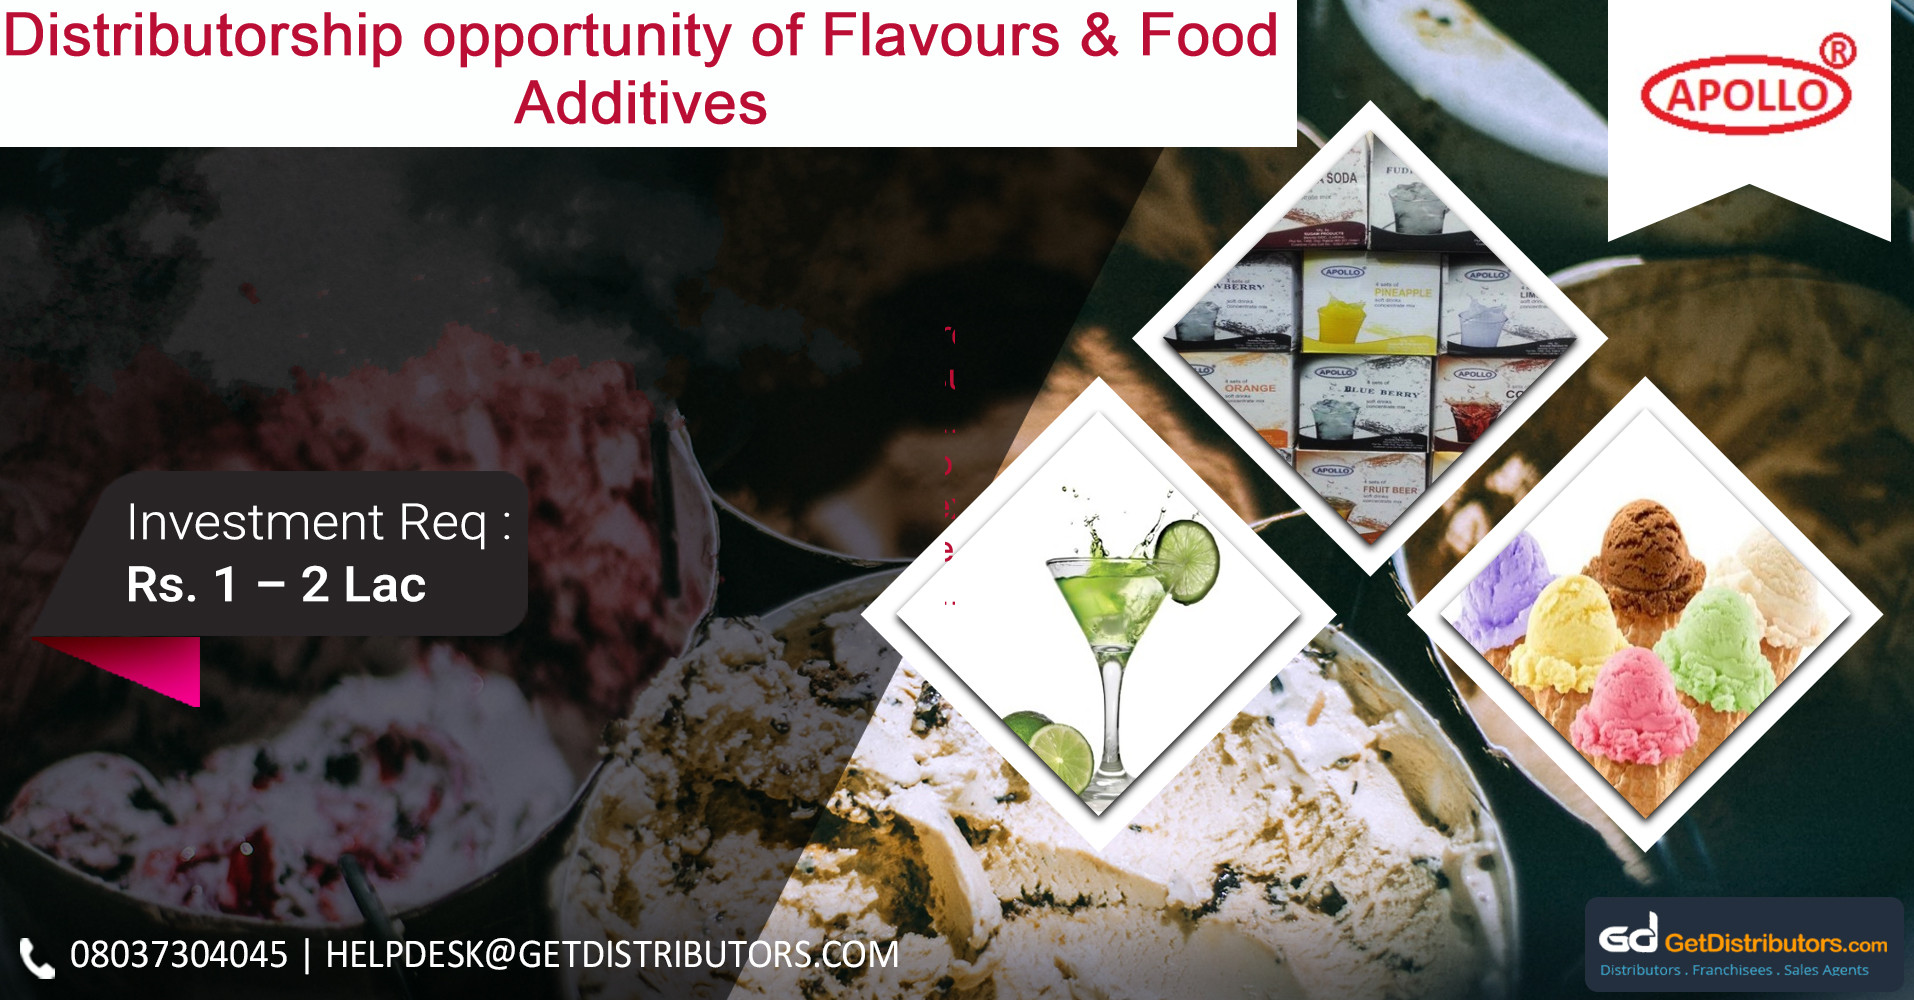 Distributorship opportunity of Flavours & Food Additives